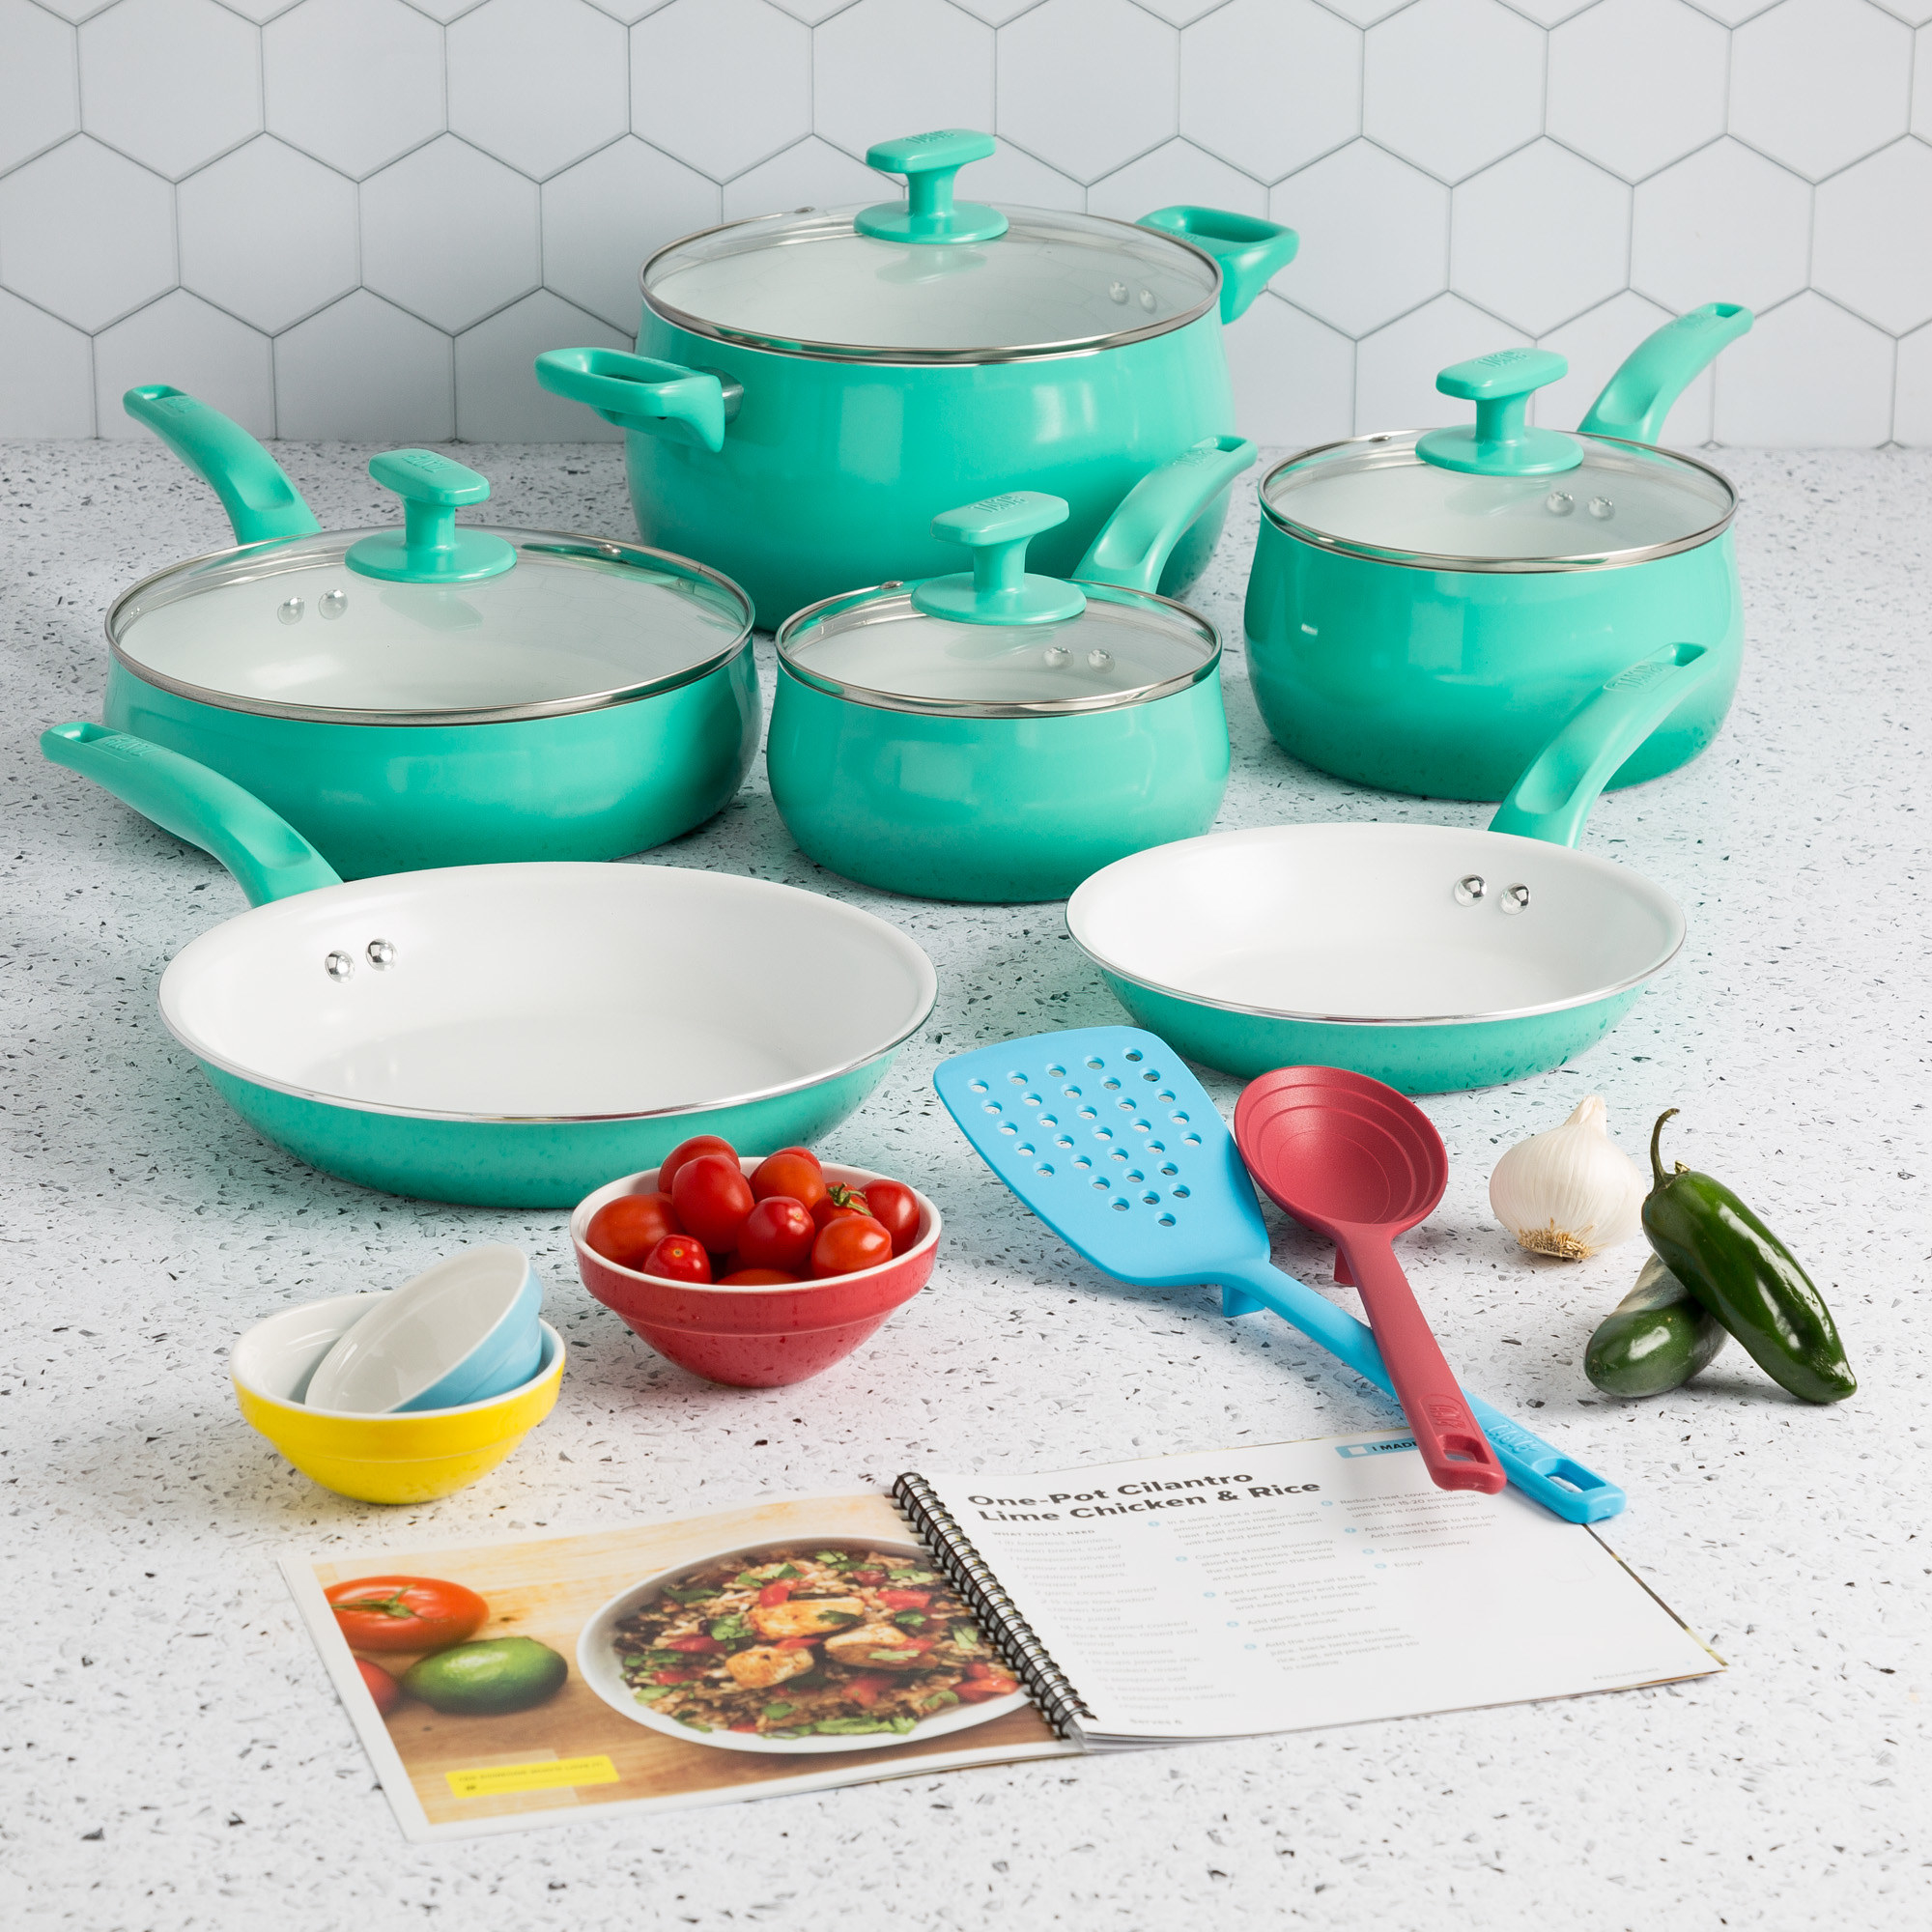 The green cookware set on a counter with recipe book